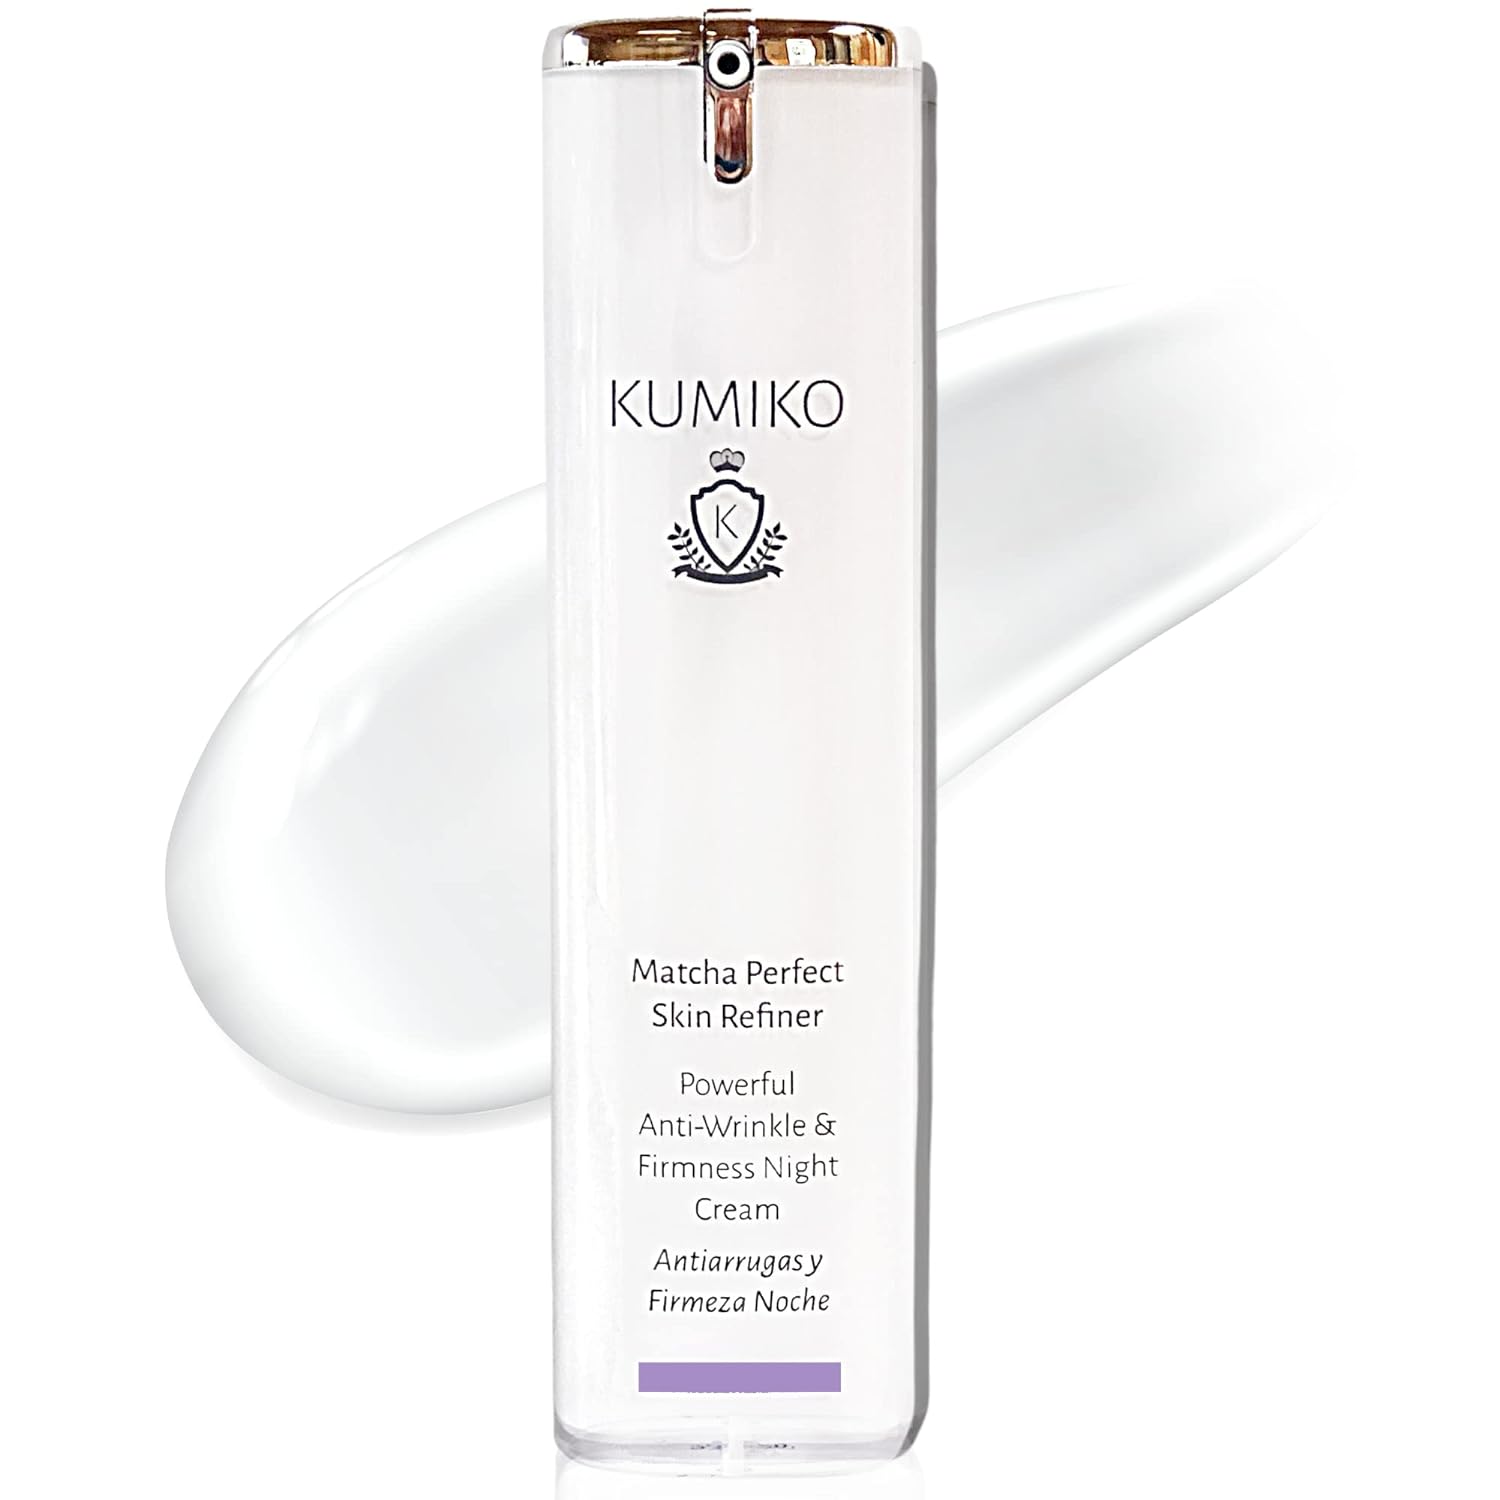 KUMIKO Matcha Perfect Skin Refiner: Powerful Nourishing Day and Night Cream for Fine Lines and Wrinkles - Intense Nutrient-Rich Moisturizer - Deep Hydrating & Moisturizing for Younger Skin - 5.92